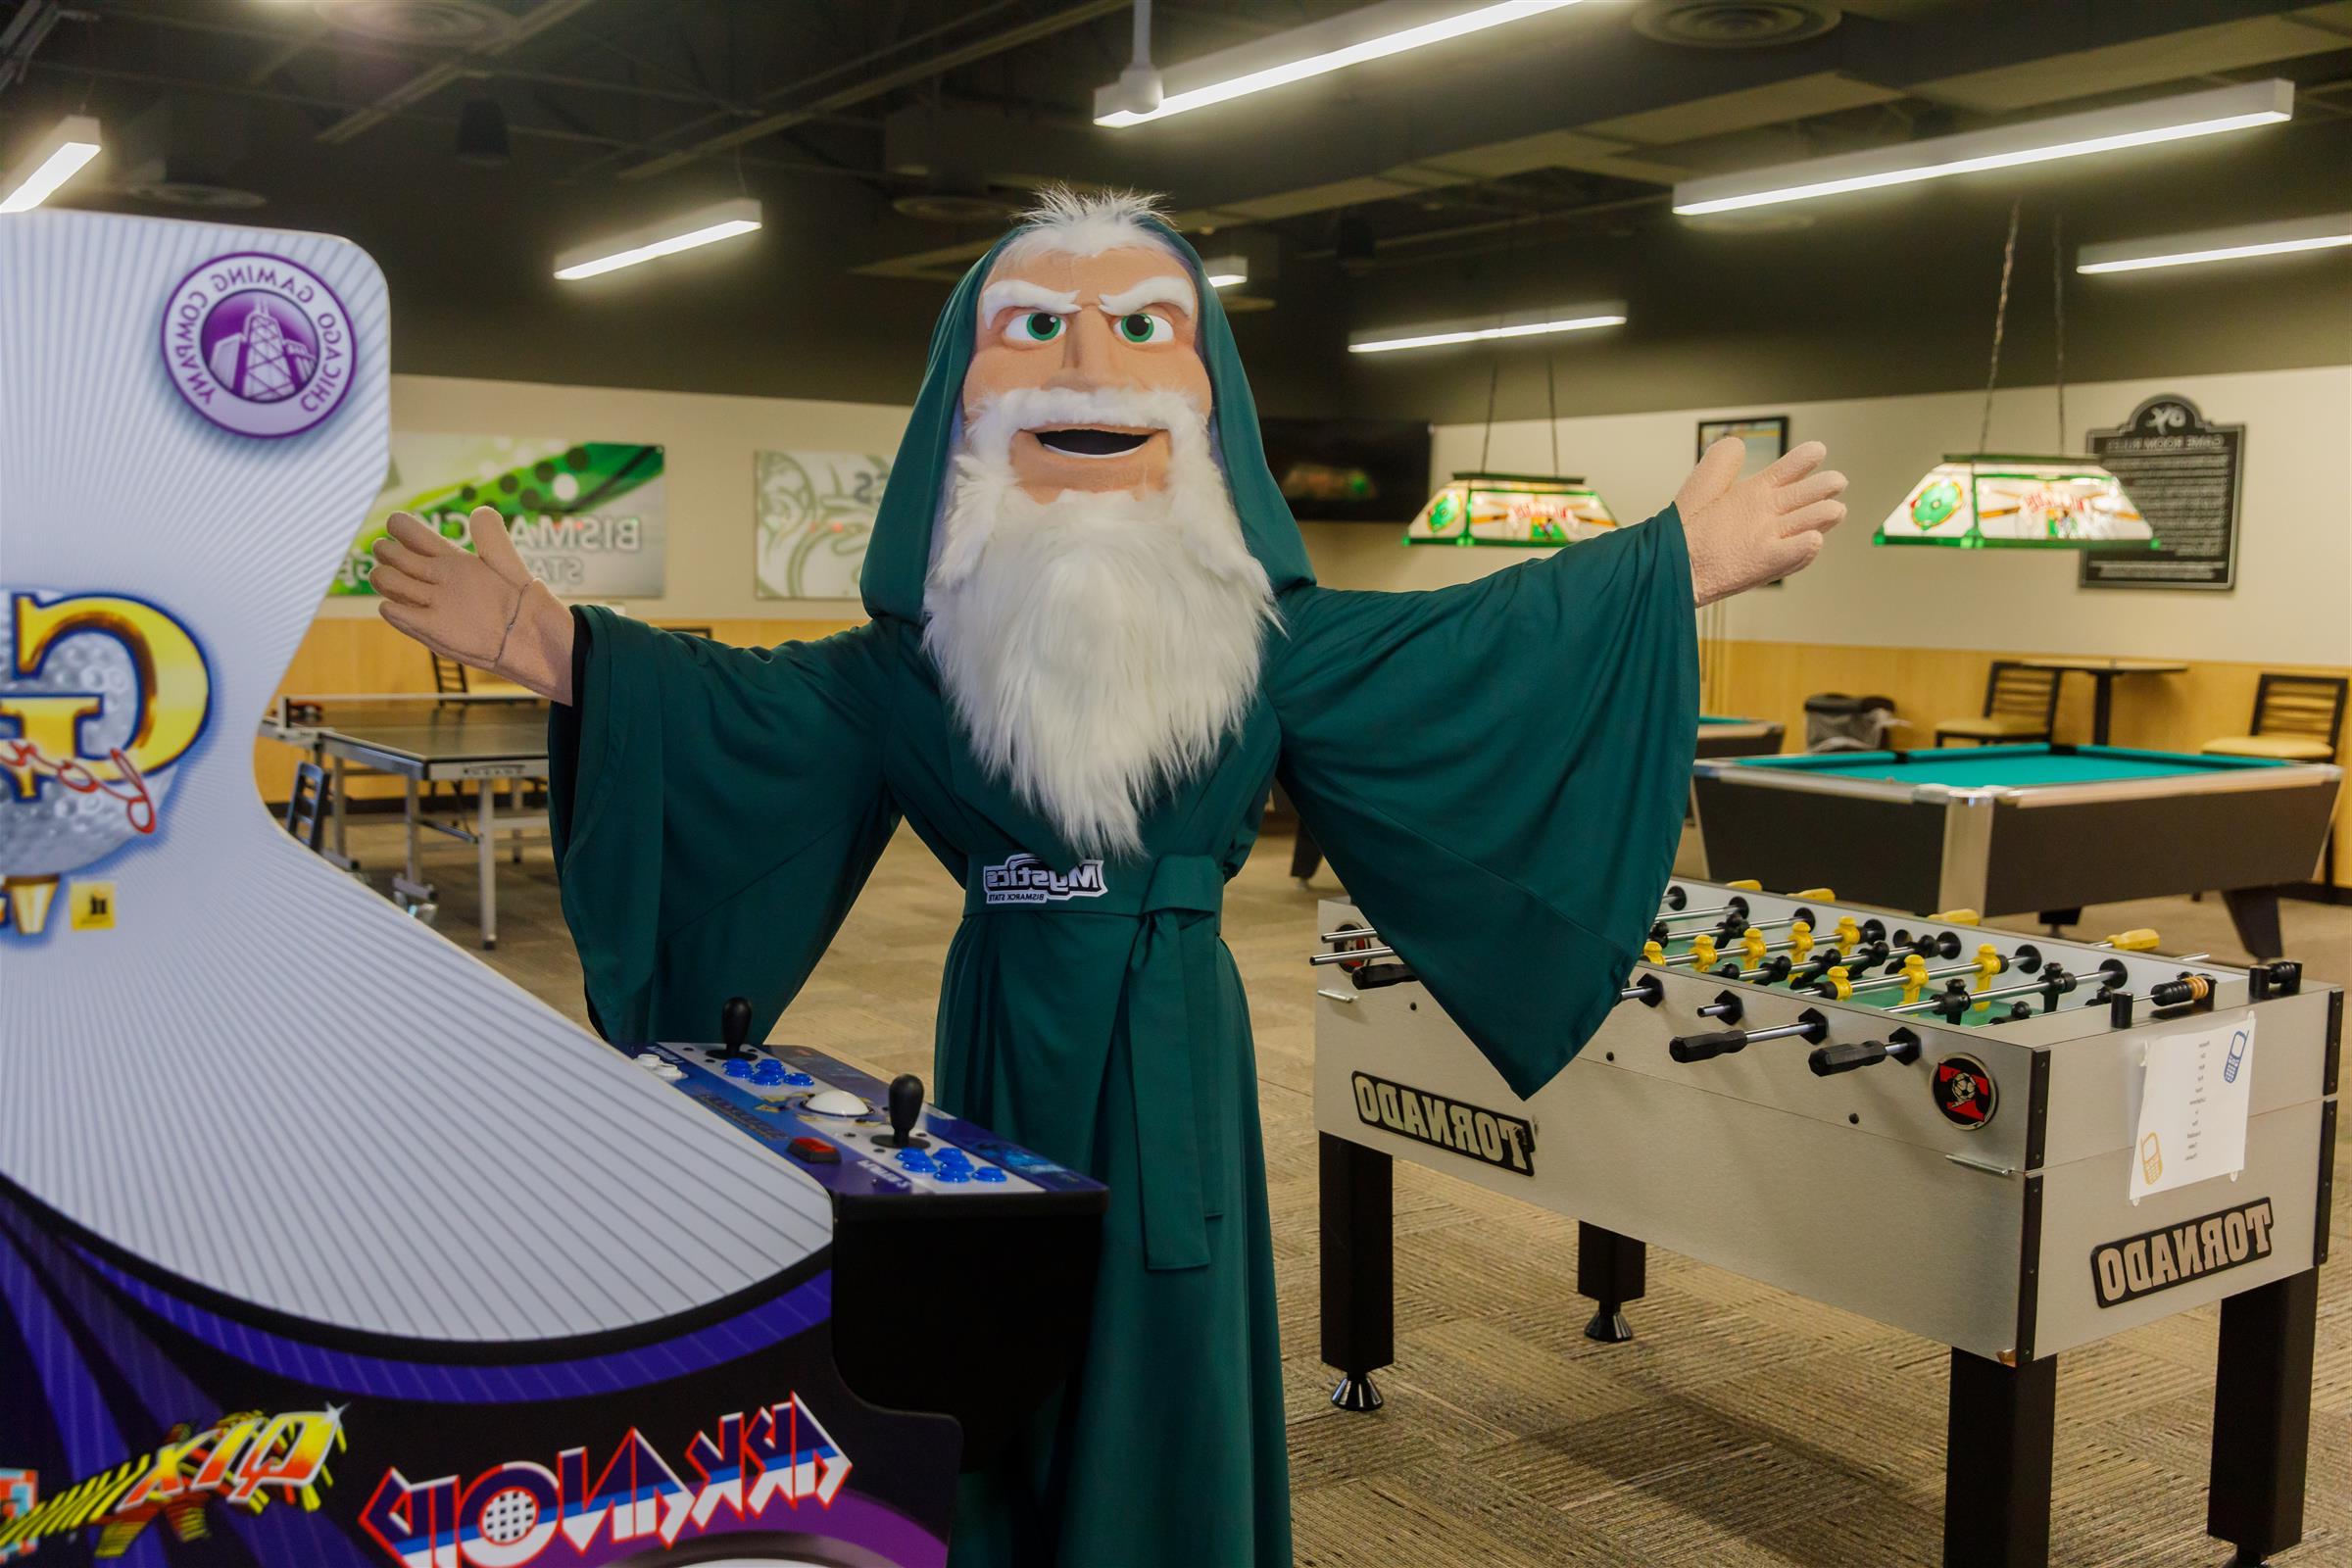 Merlin the Mystic Mascot is holding his arms open wide in the middle of the BSC game room, showing pool tables, foos ball table, and arcade games